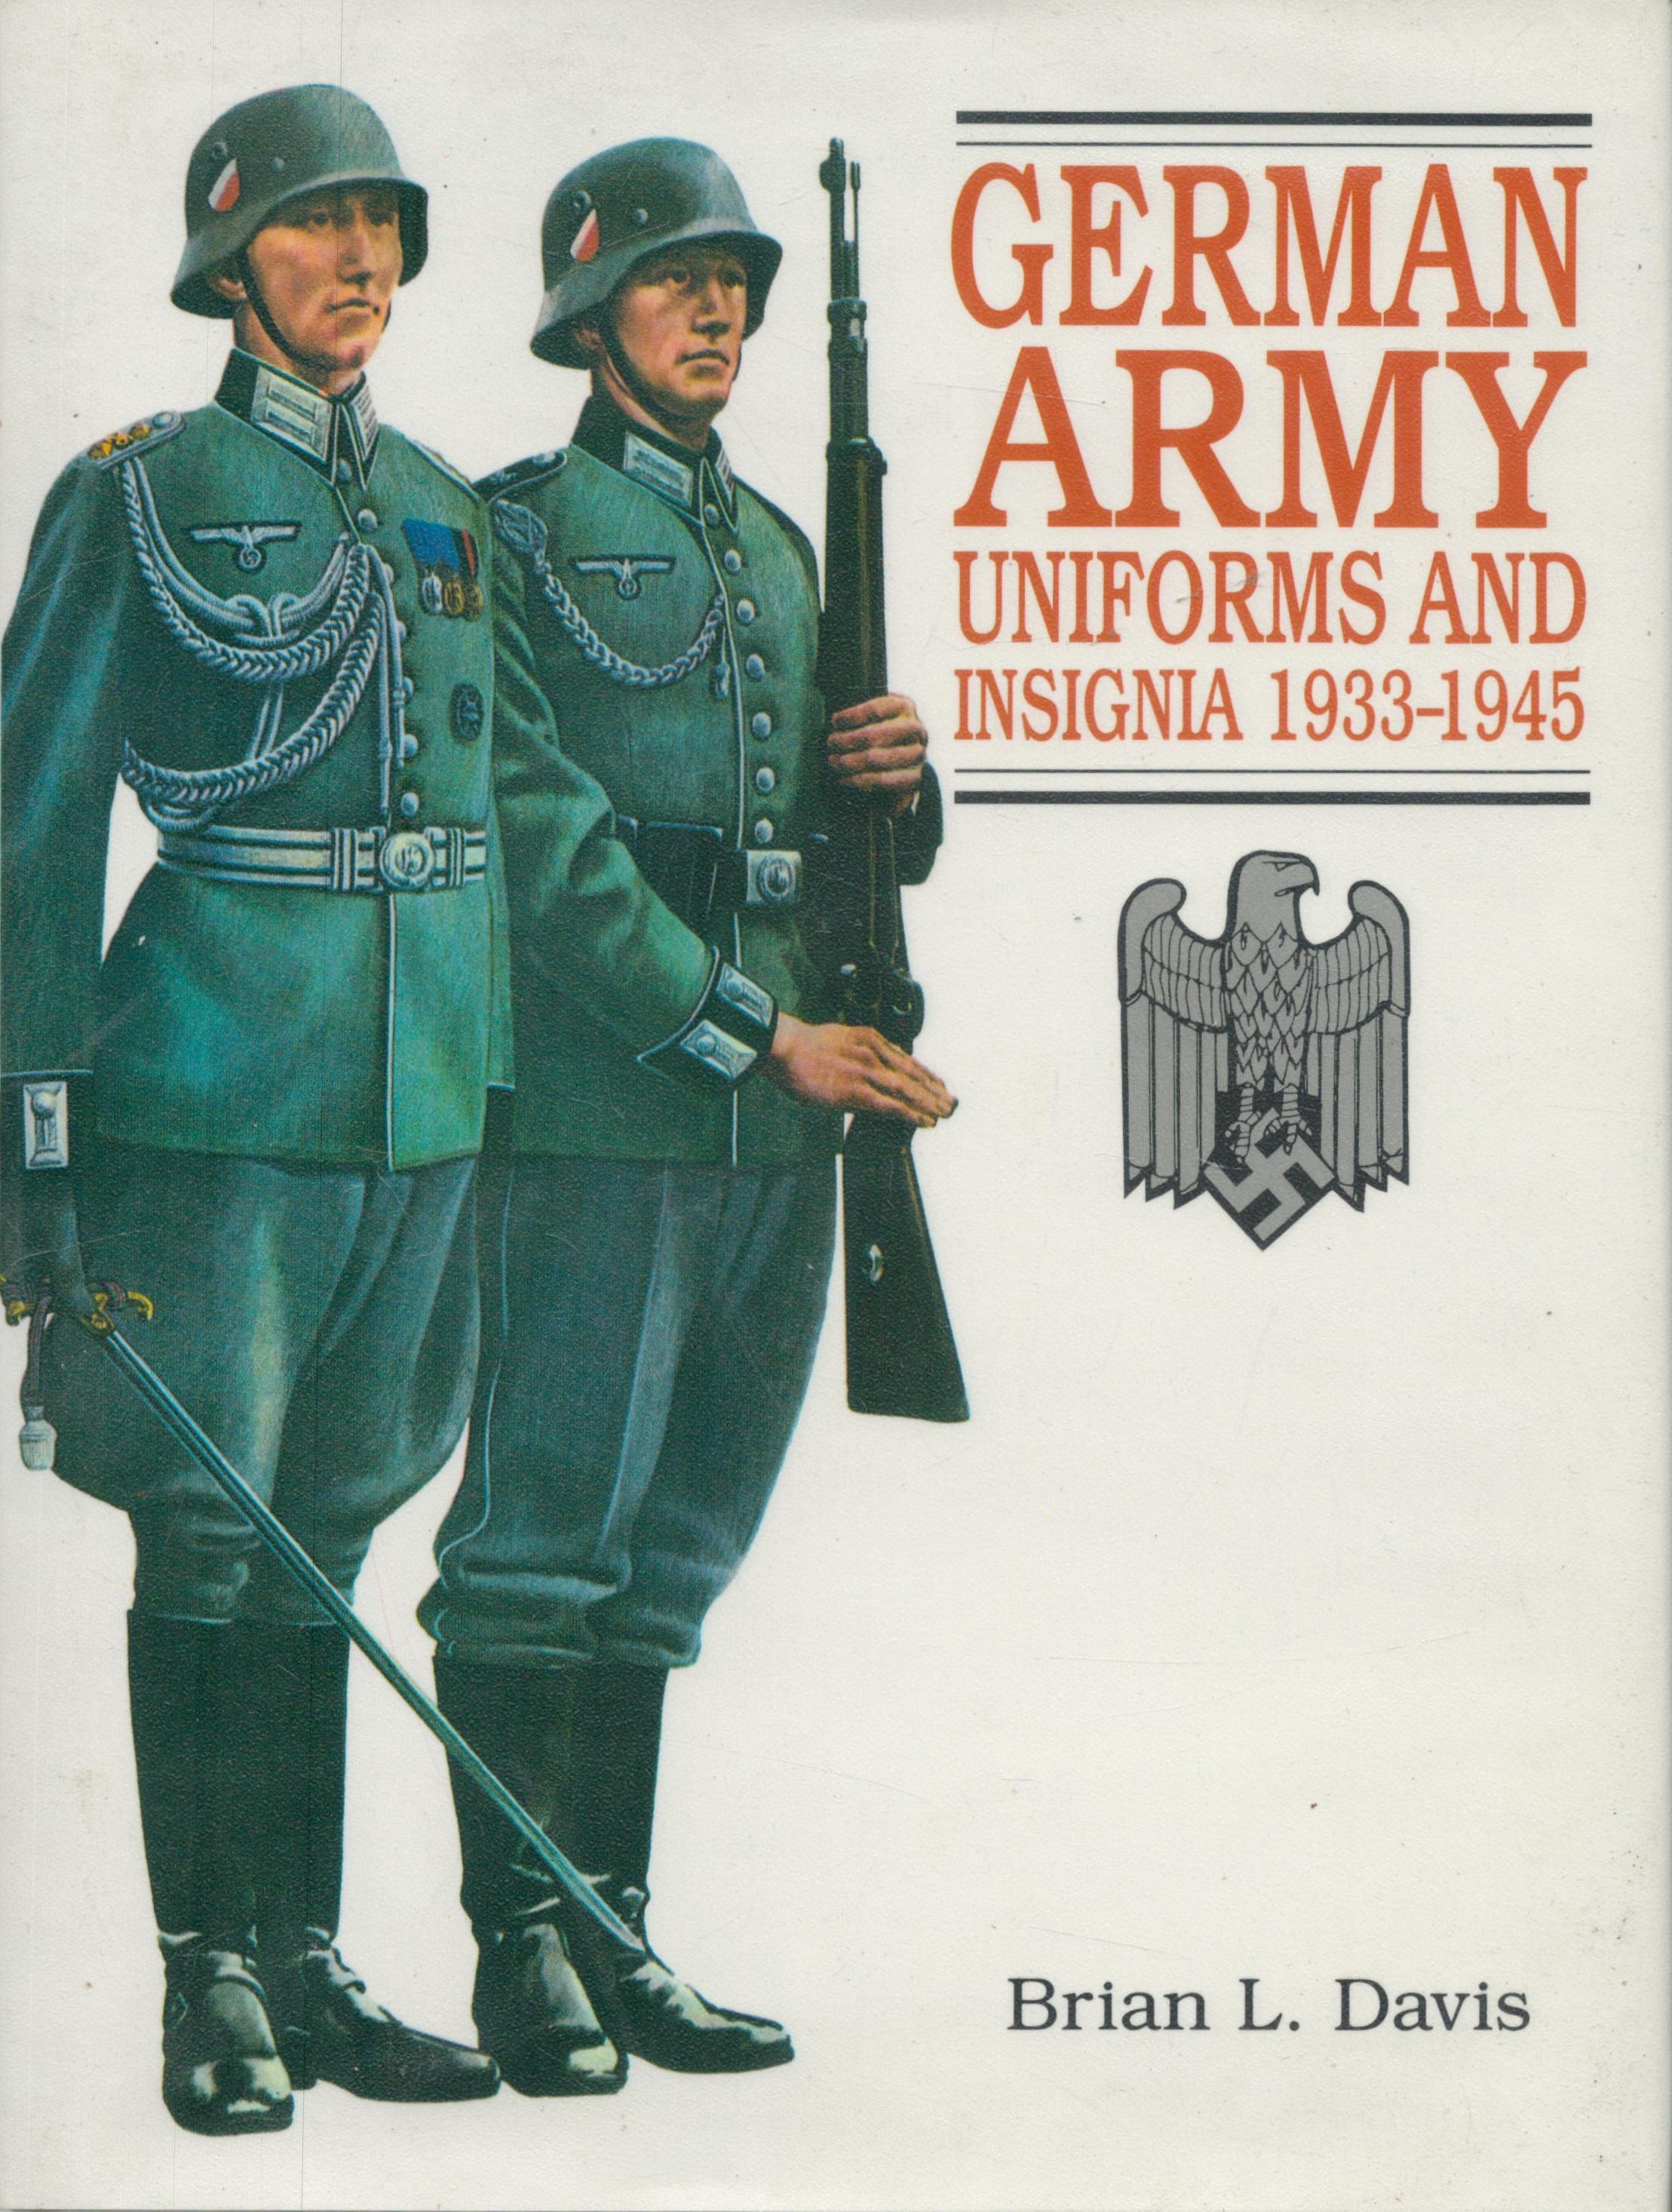 German Army Uniforms and Insignia 1933 1945 by Brian L Davis 1998 edition unknown Hardback Book with - Image 3 of 9